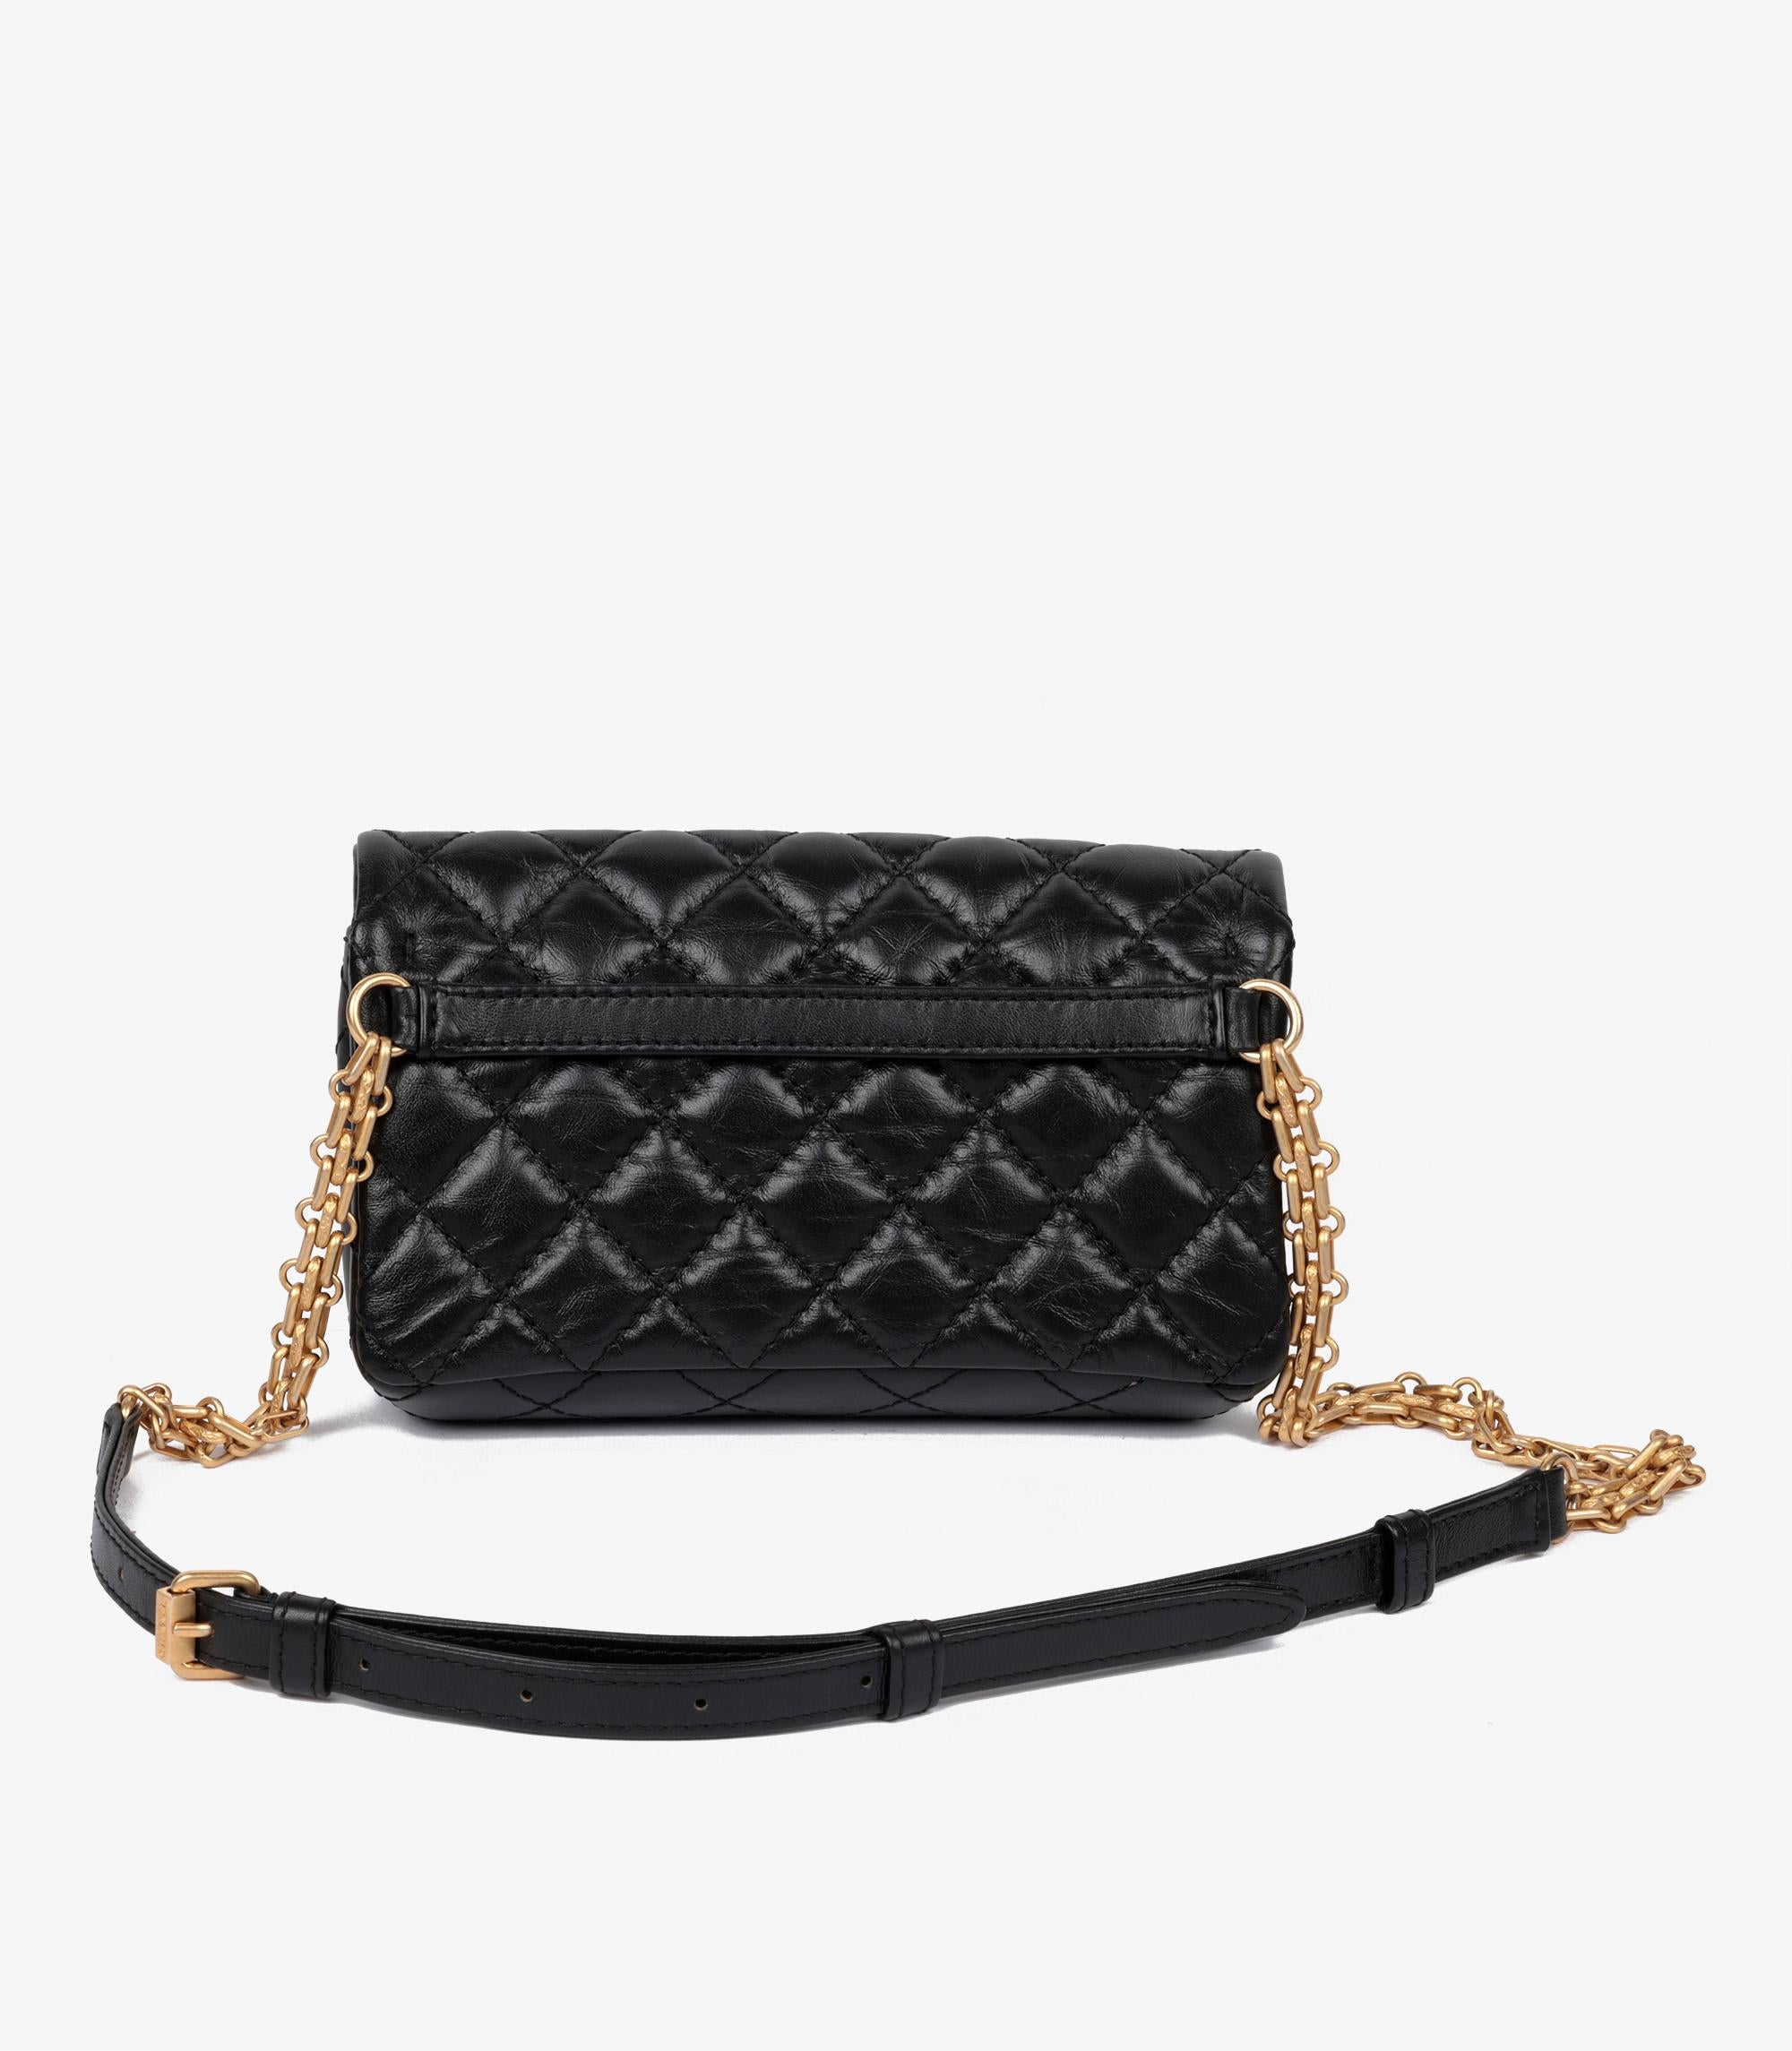 Chanel Black Quilted Aged Calfskin Leather 2.55 Reissue Belt Bag For Sale 2